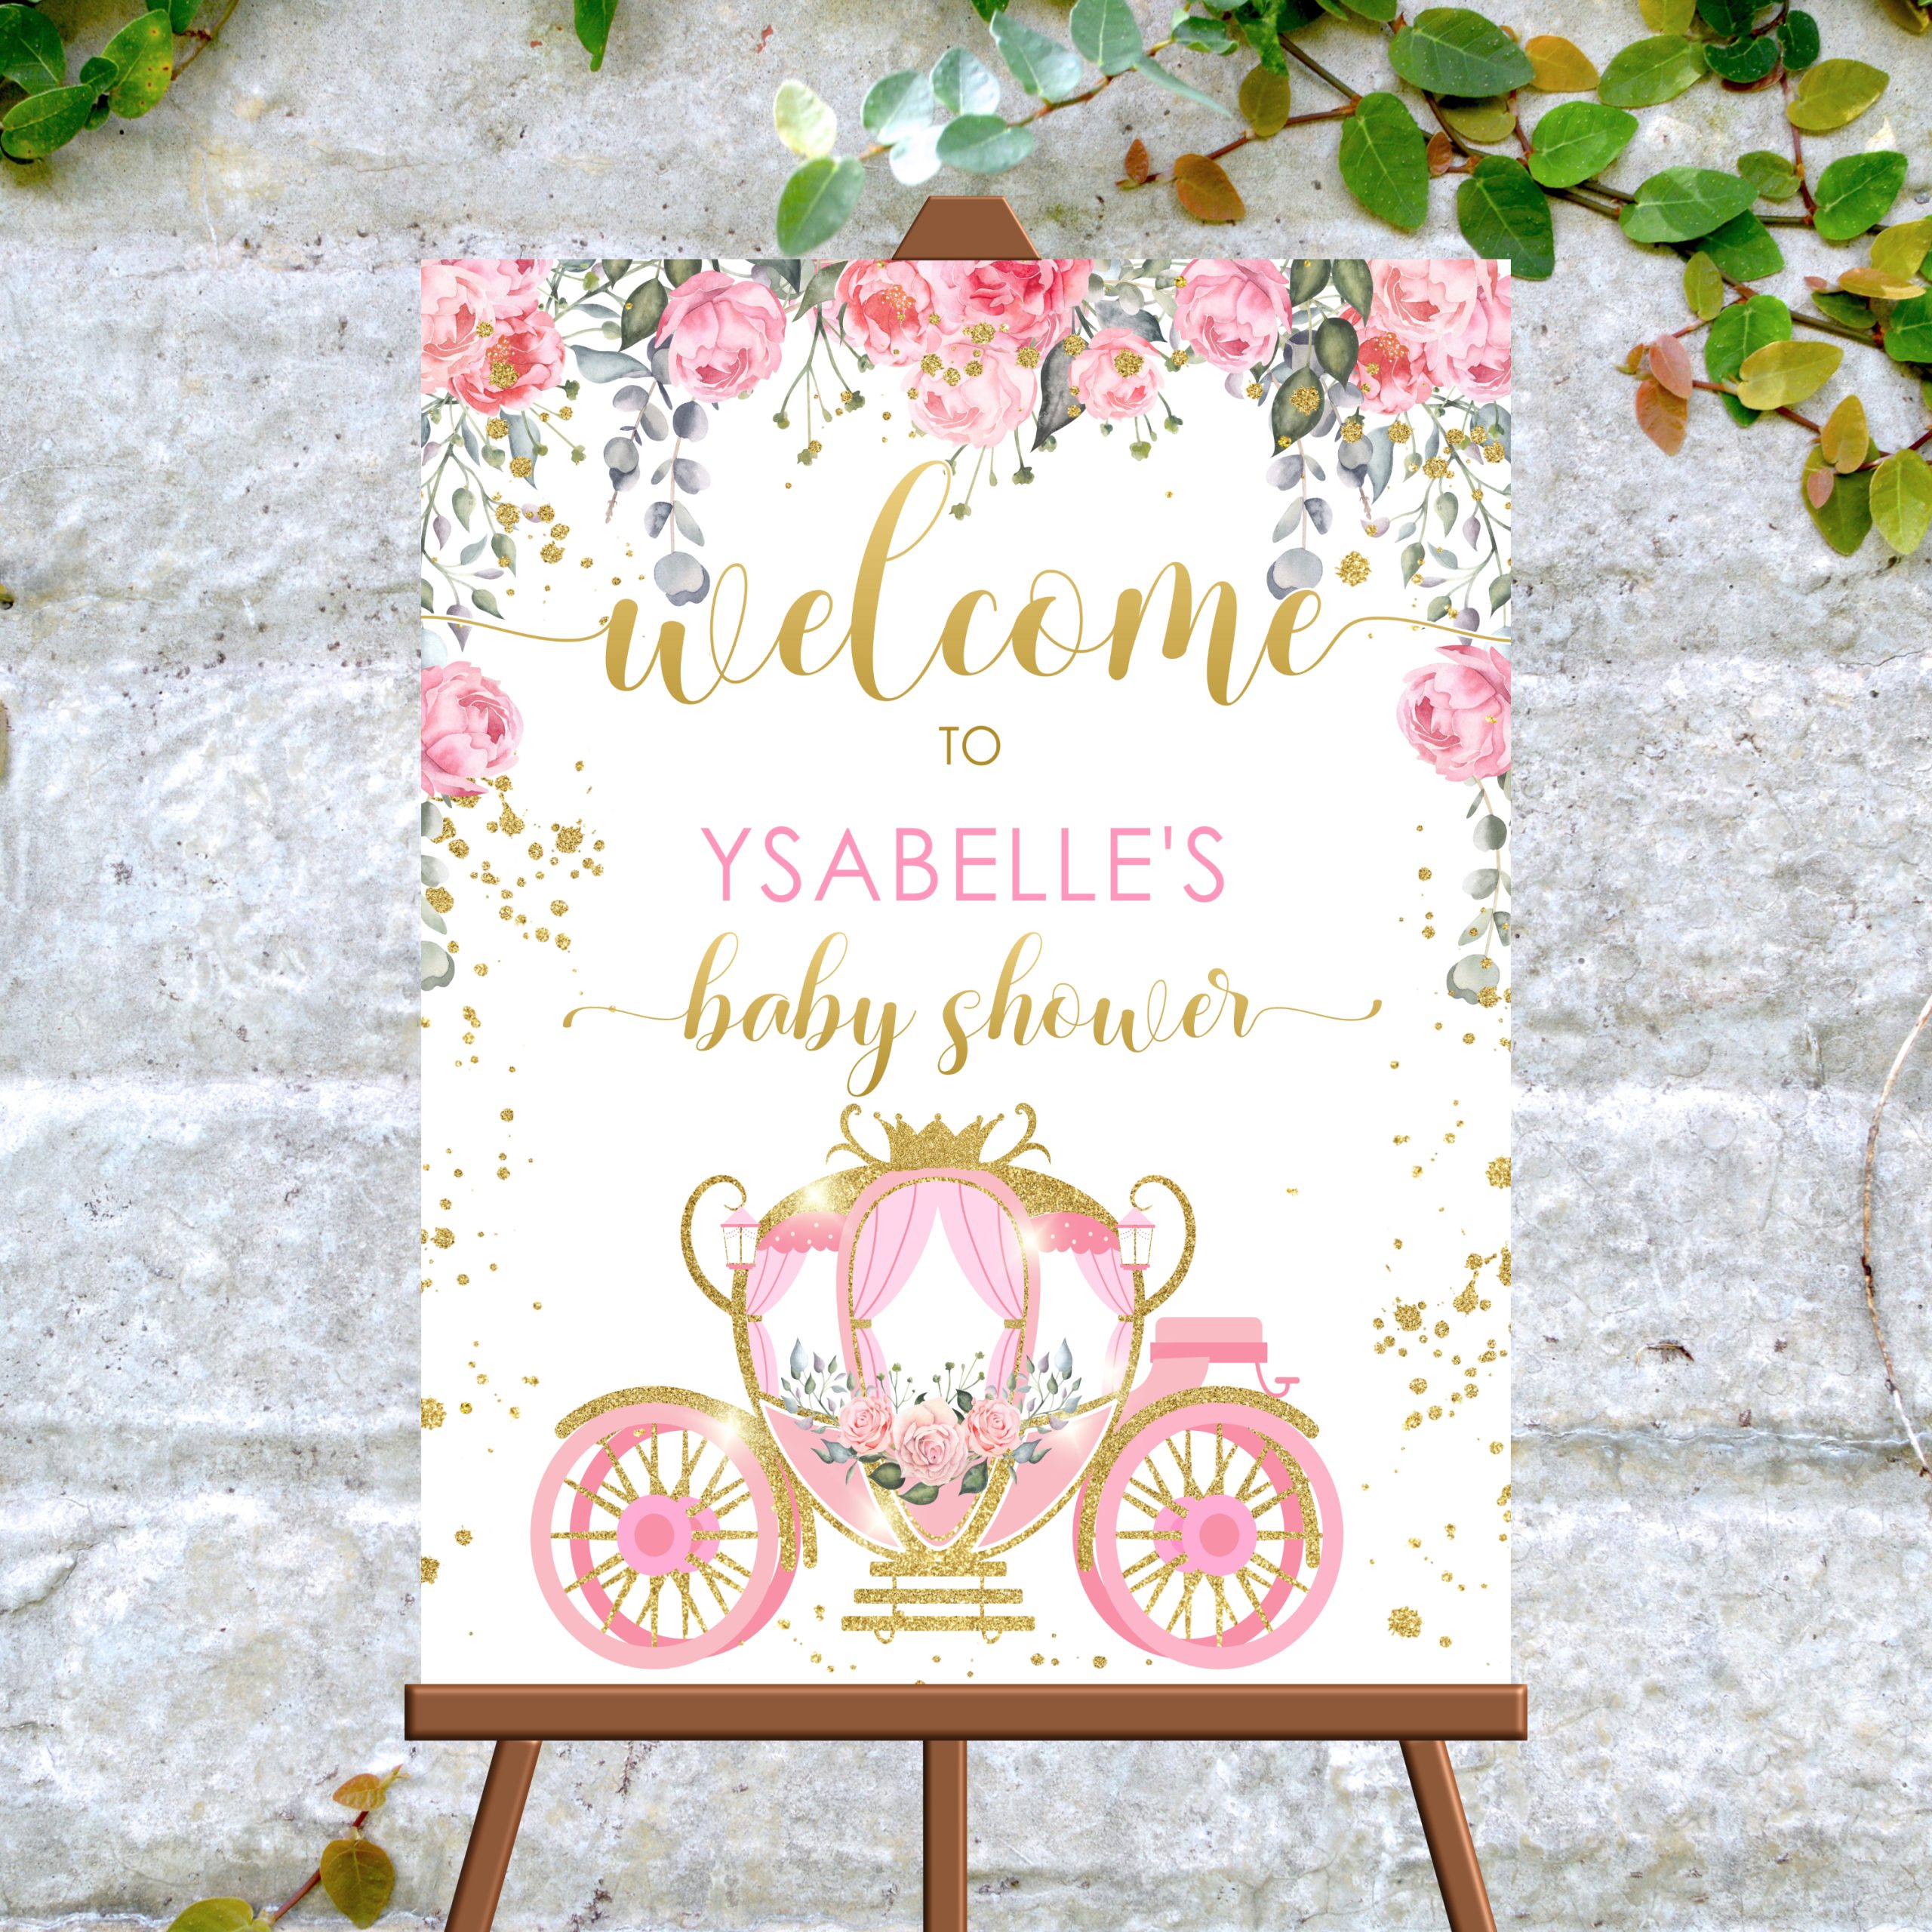 DECOR | SIGNS Welcome Sign with Pink Flowers & Princess Carriage | Floral Princess Party Decor | Editable Corjl Template Customizable Welcome Sign